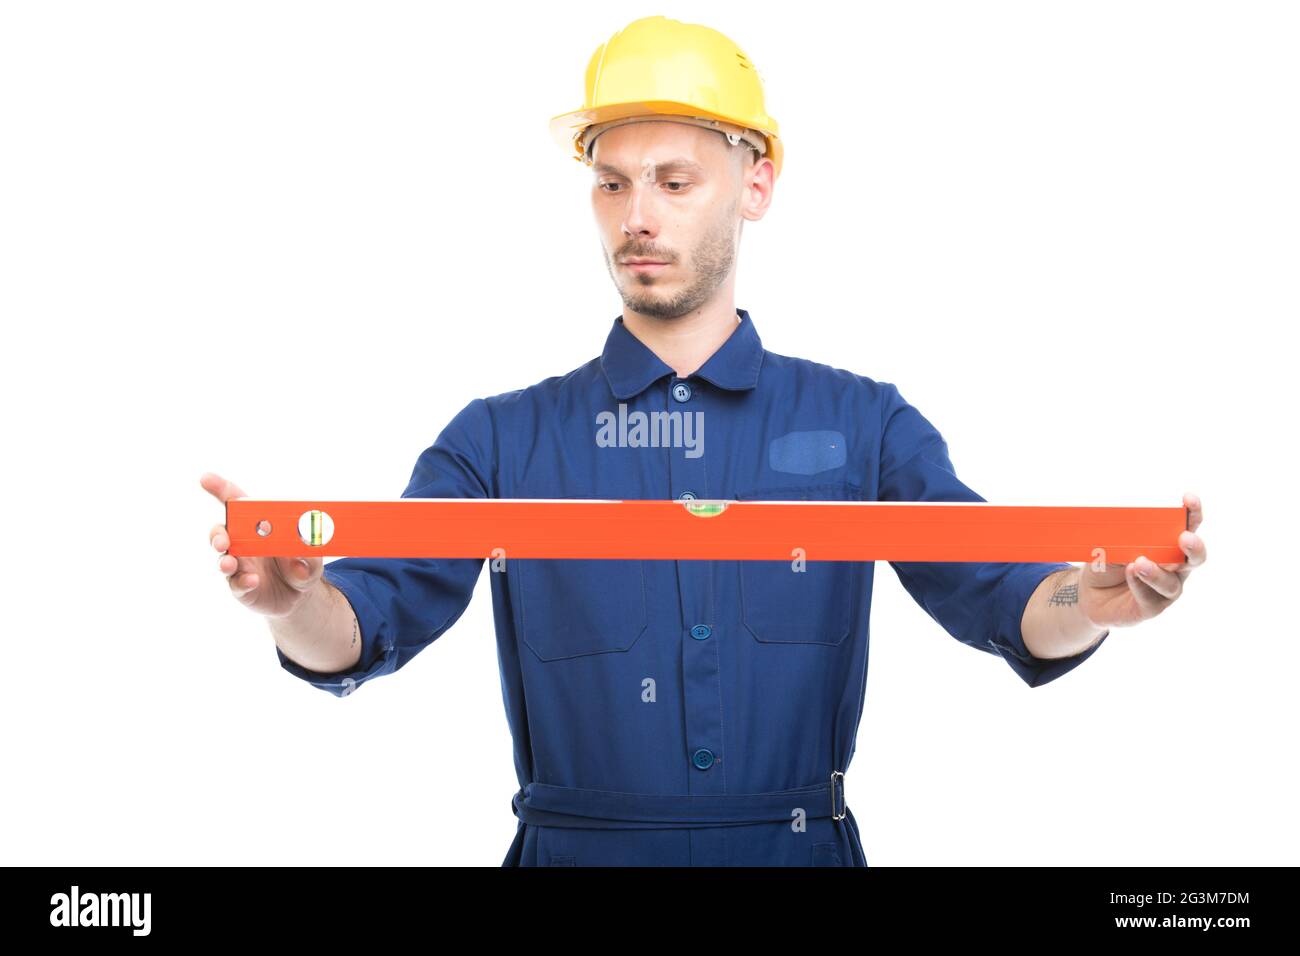 Portrait of successful handsome young adult Caucasian construction engineer wearing uniform with hardhat measuring level of something Stock Photo